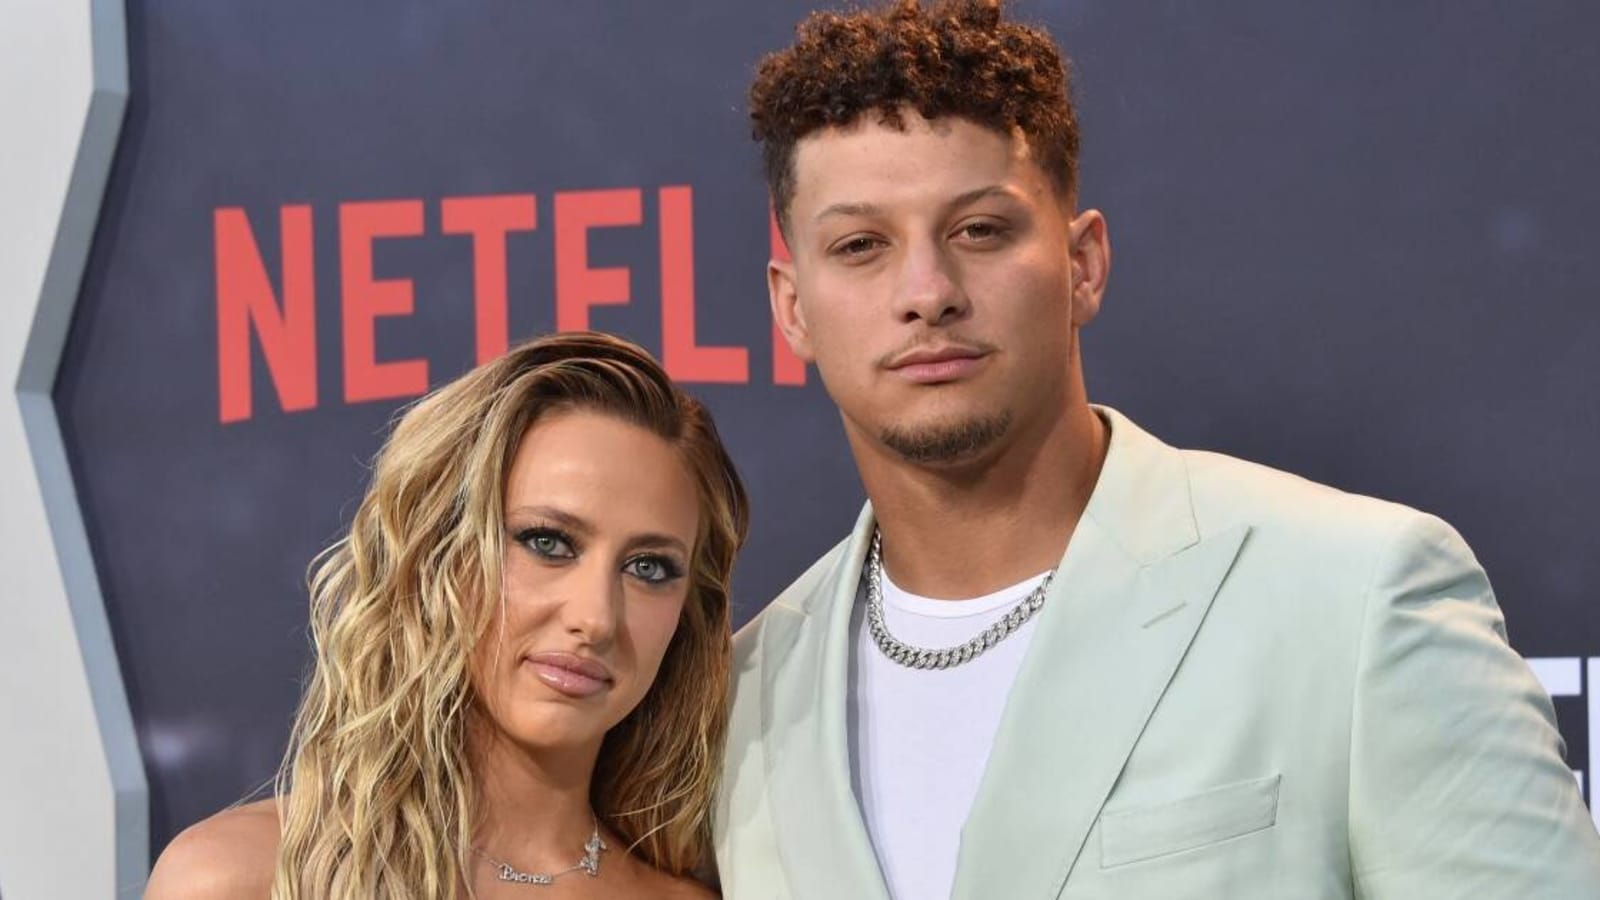 Brittany Mahomes ditches signature blonde hair for ‘spicy’ new look